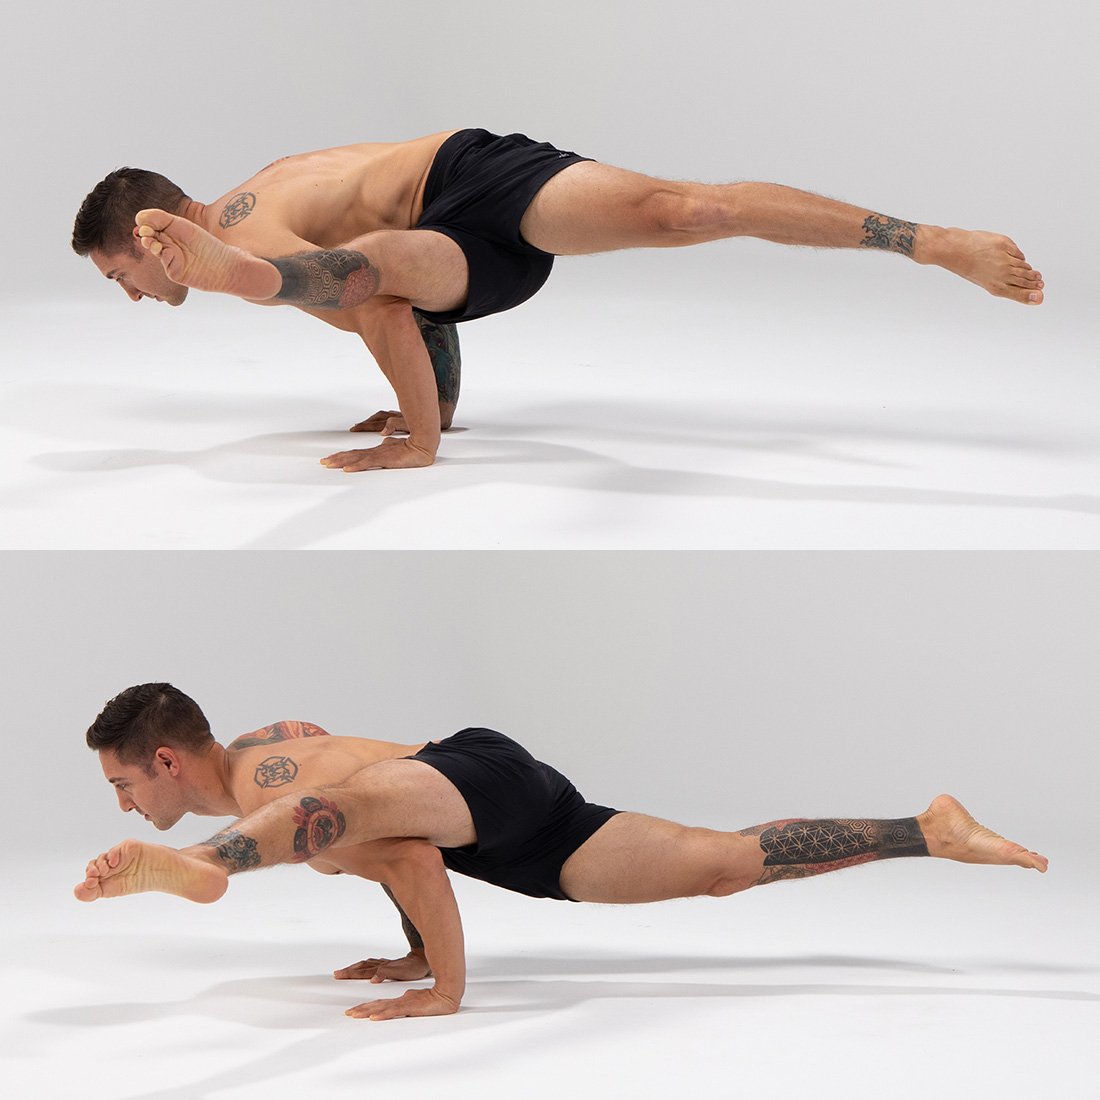 Learn Forearm Wheel Pose With This Photo Tutorial | YouAligned